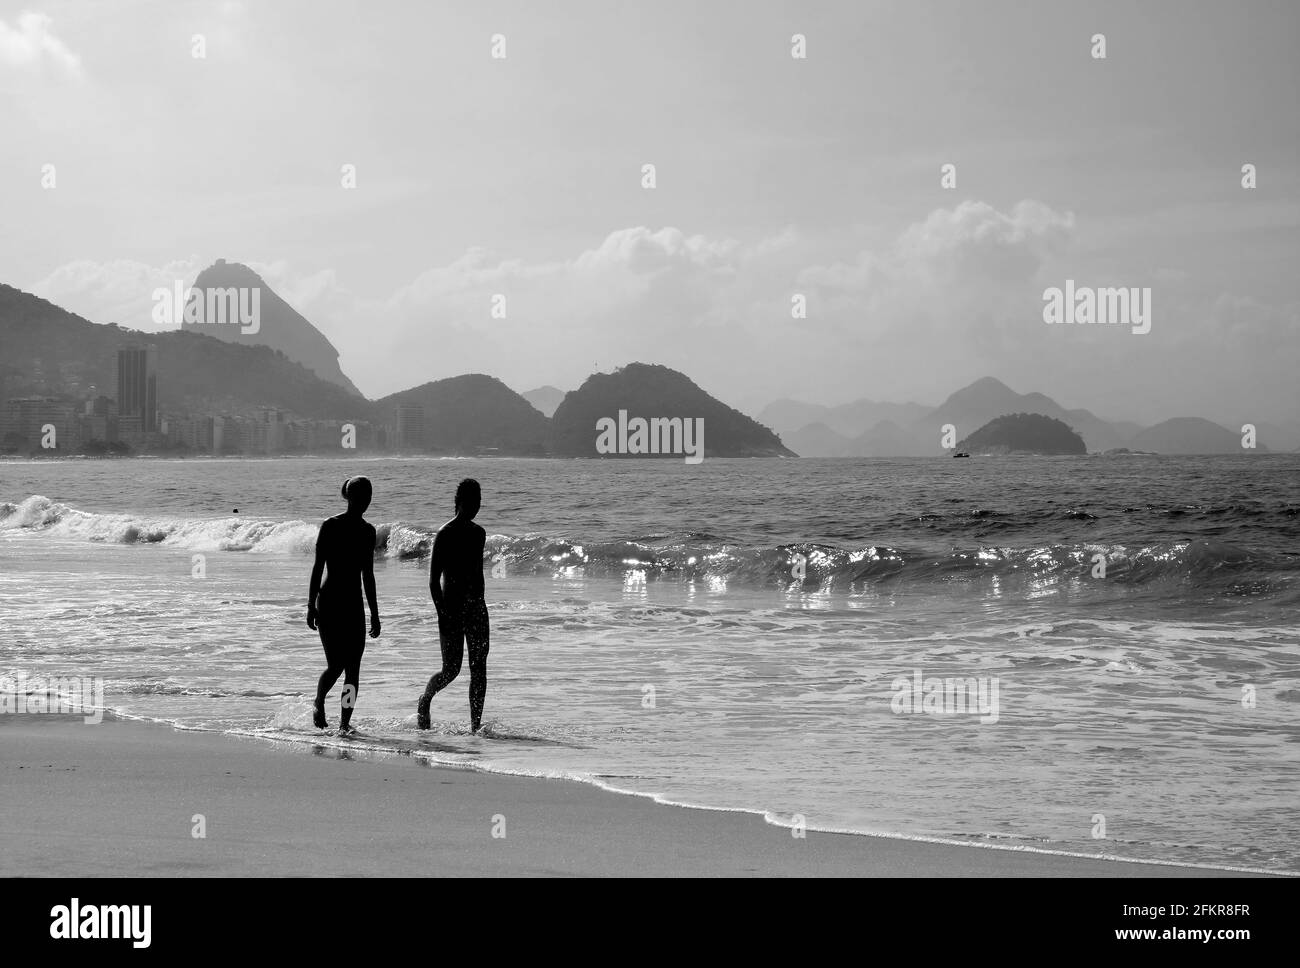 Silhouette of two young women walking on the sandy beach in monochrome Stock Photo